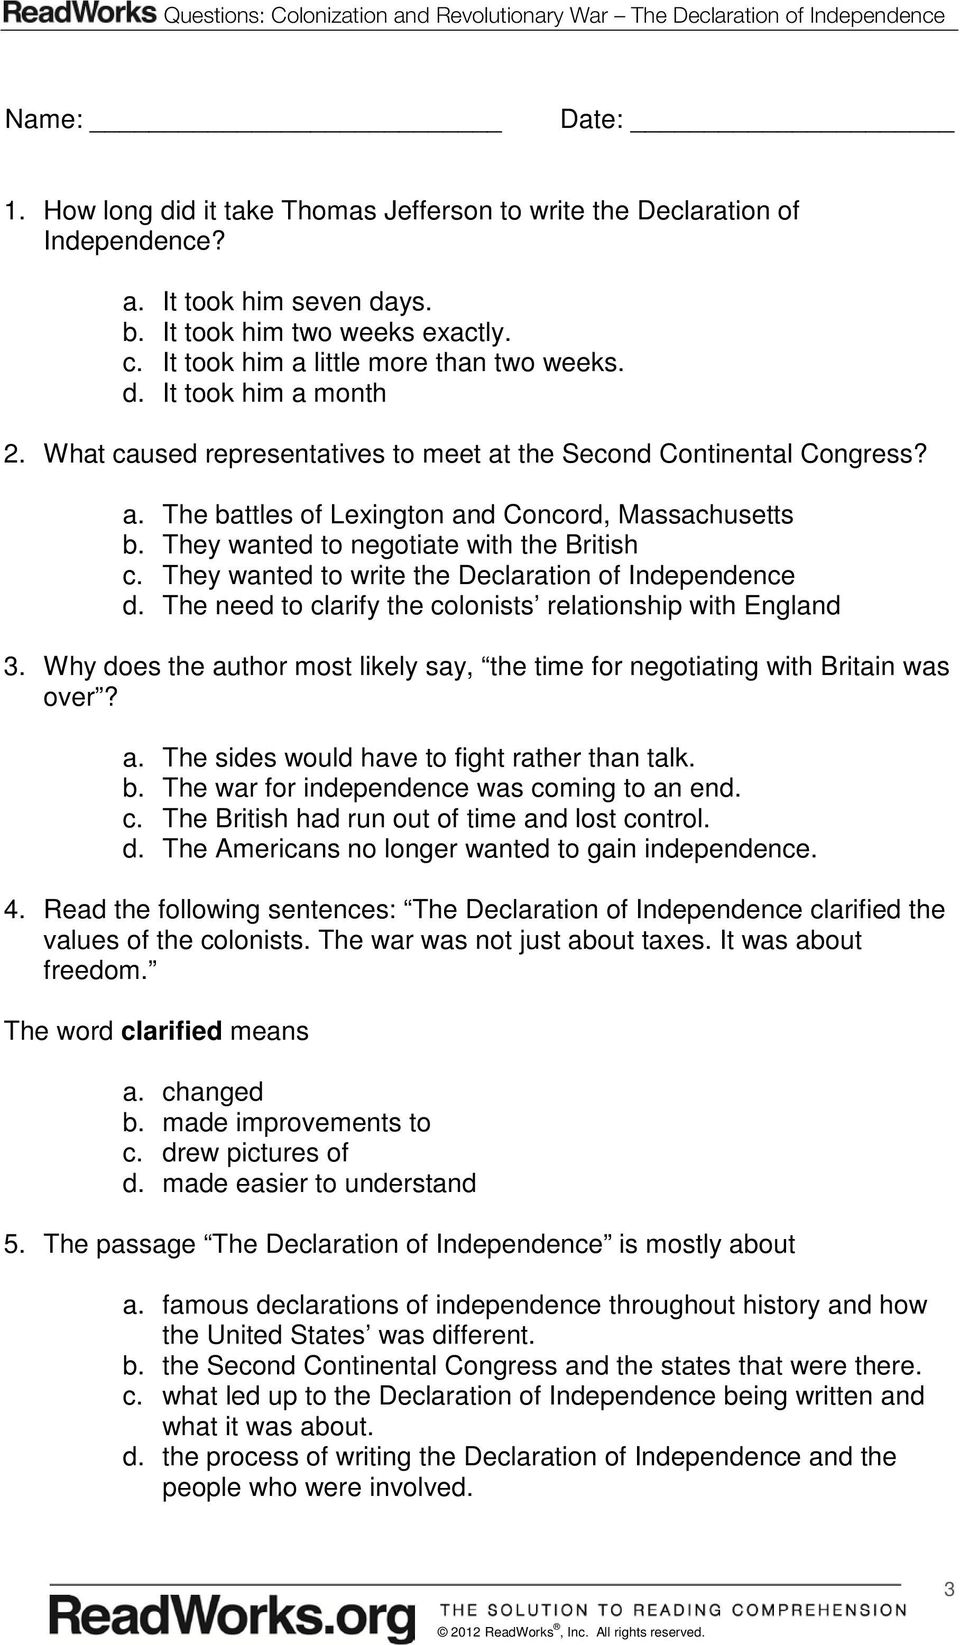 Declaration Of Independence Worksheet Answers - Nidecmege In Declaration Of Independence Worksheet Answers